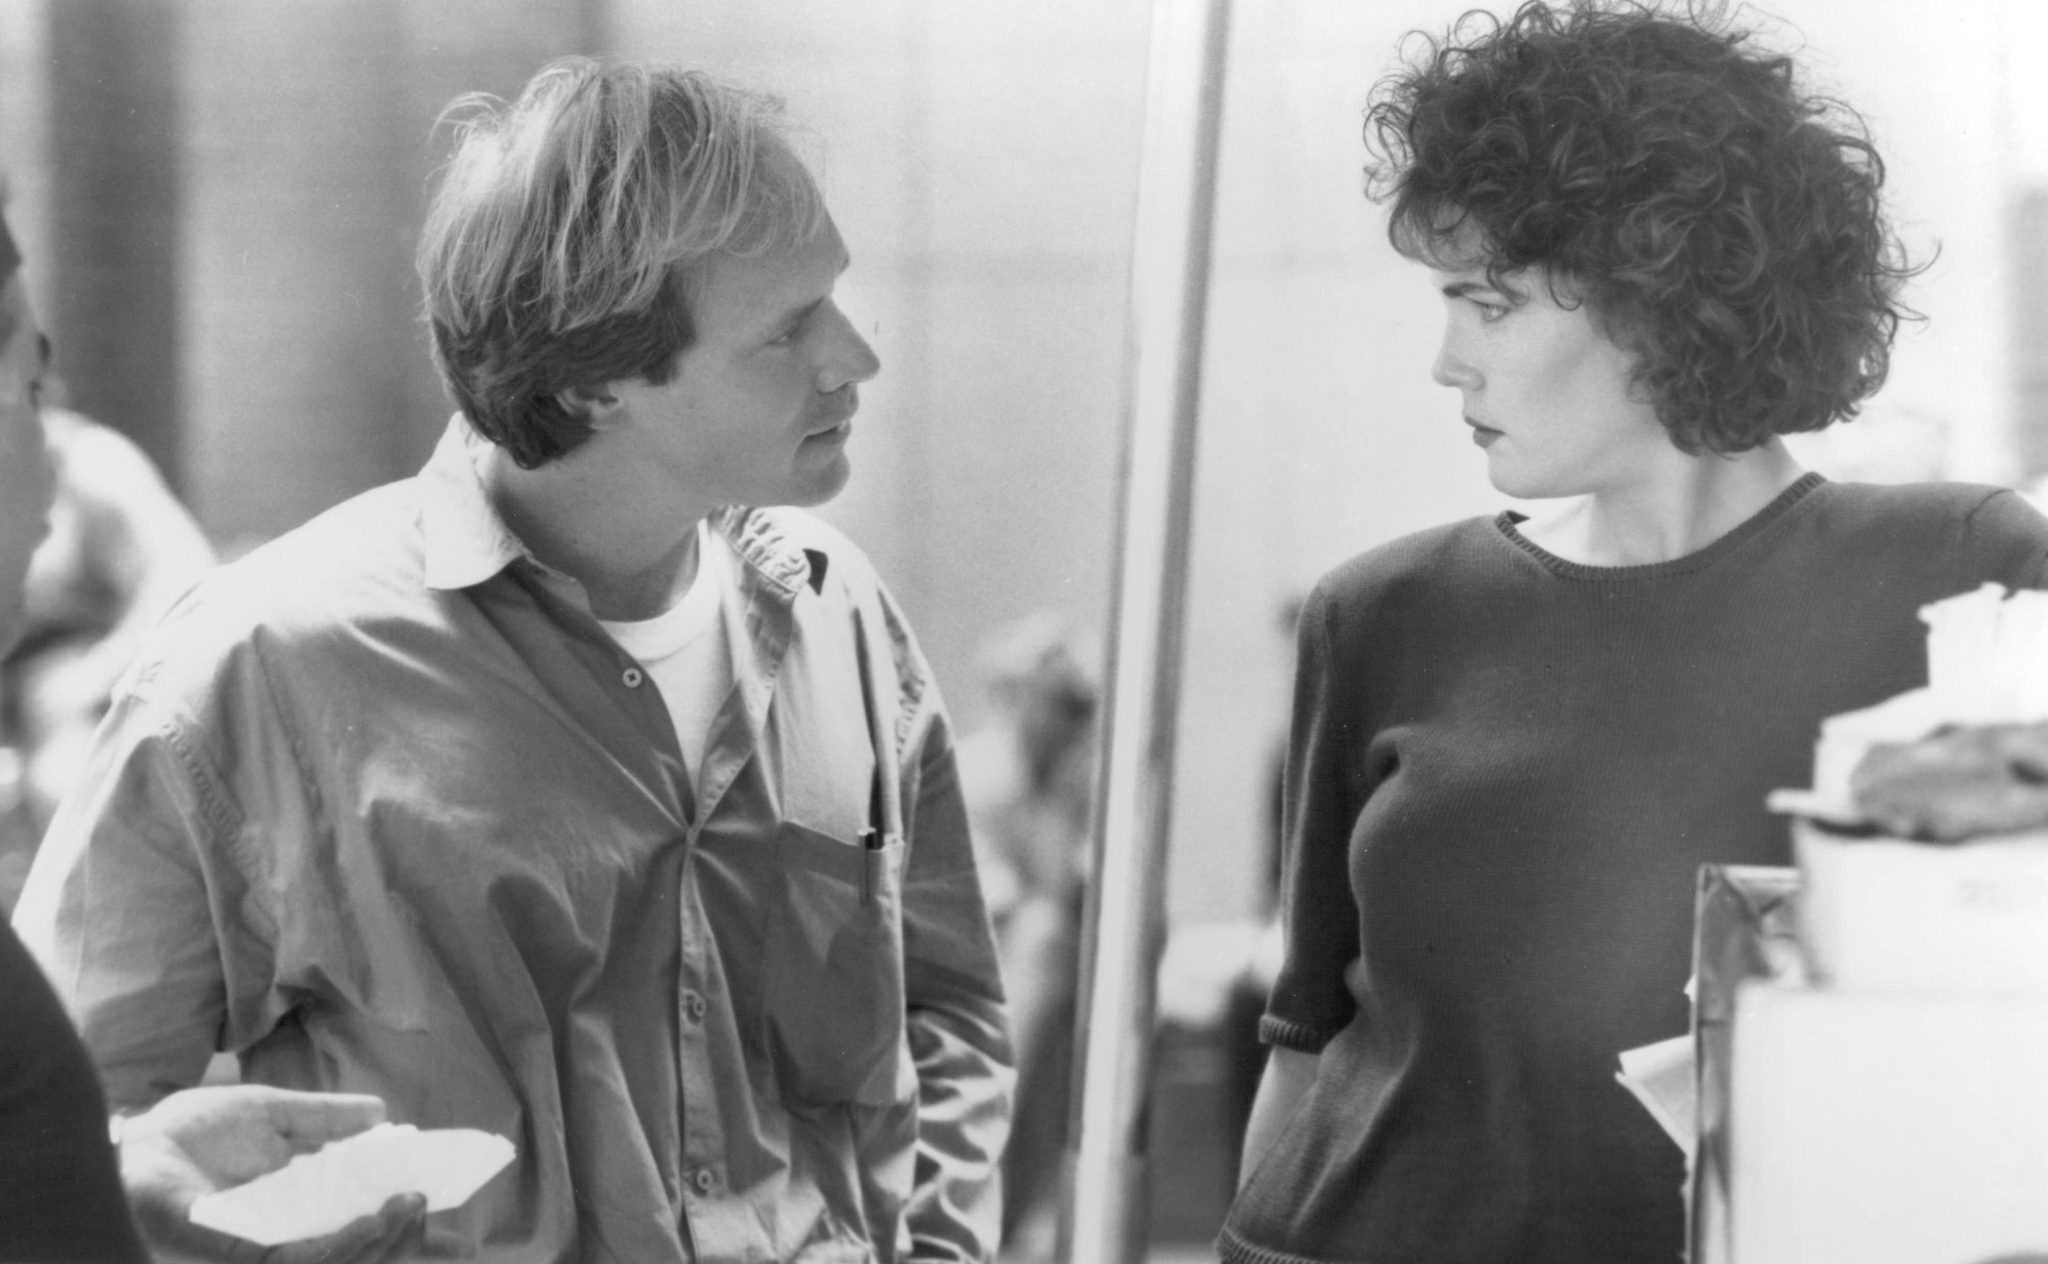 Still of Elizabeth McGovern and Jan Egleson in A Shock to the System (1990)